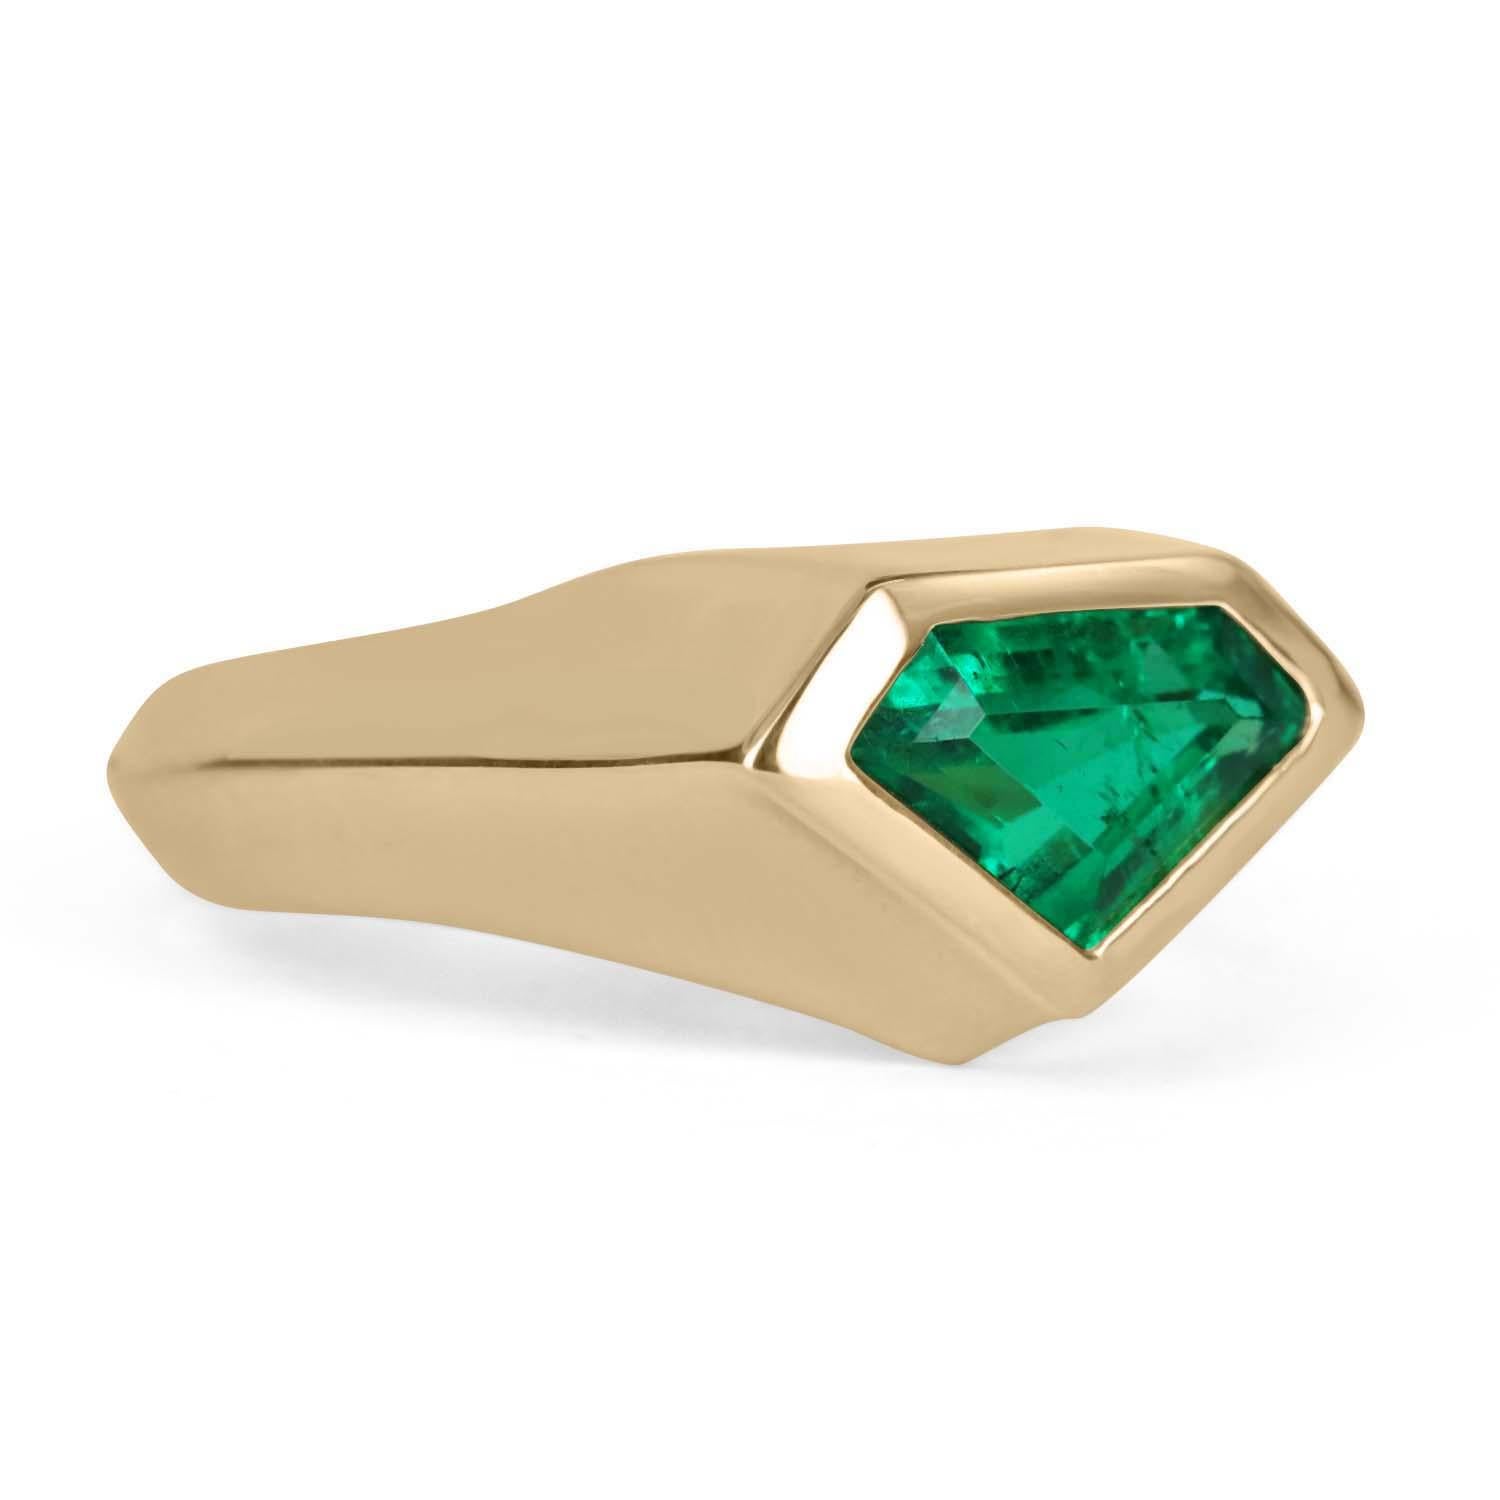 Displayed is a one-of-a-kind, Colombian emerald, superman cut solitaire ring. This custom piece is extremely unique, as having emeralds cut in these rare shapes is very uncommon. This Colombian emerald superman/kite cut showcases a rare, 1.61-carat